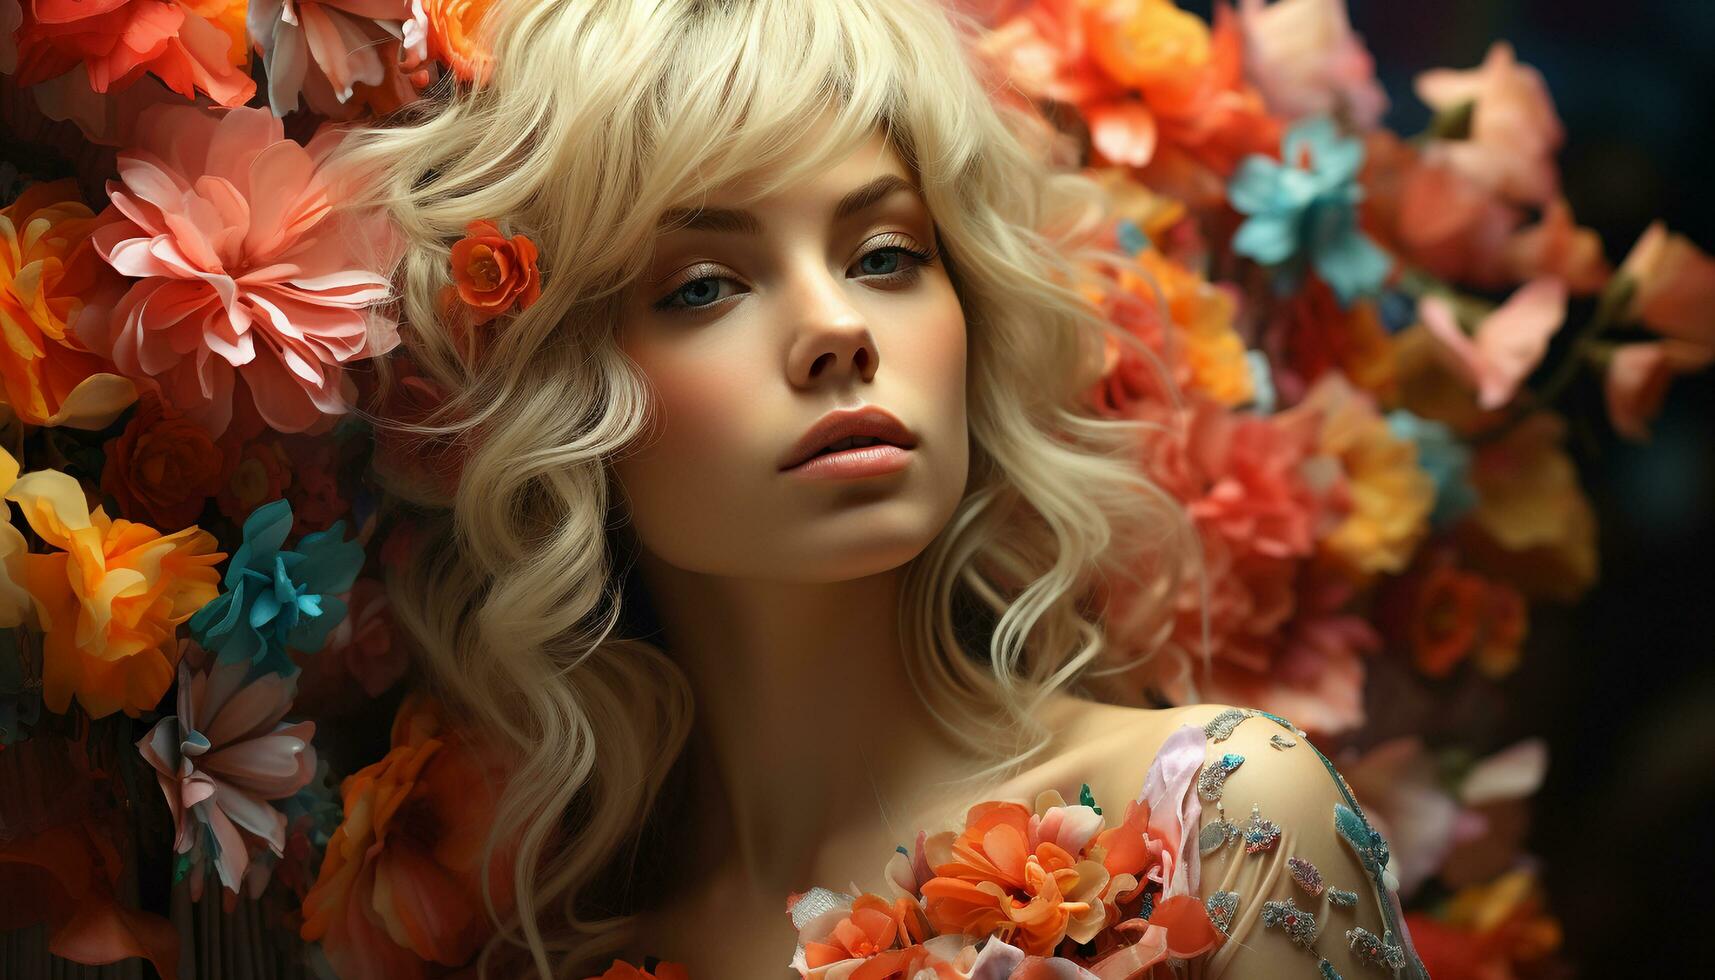 A beautiful blond woman with a flower, looking at the camera generated by AI photo